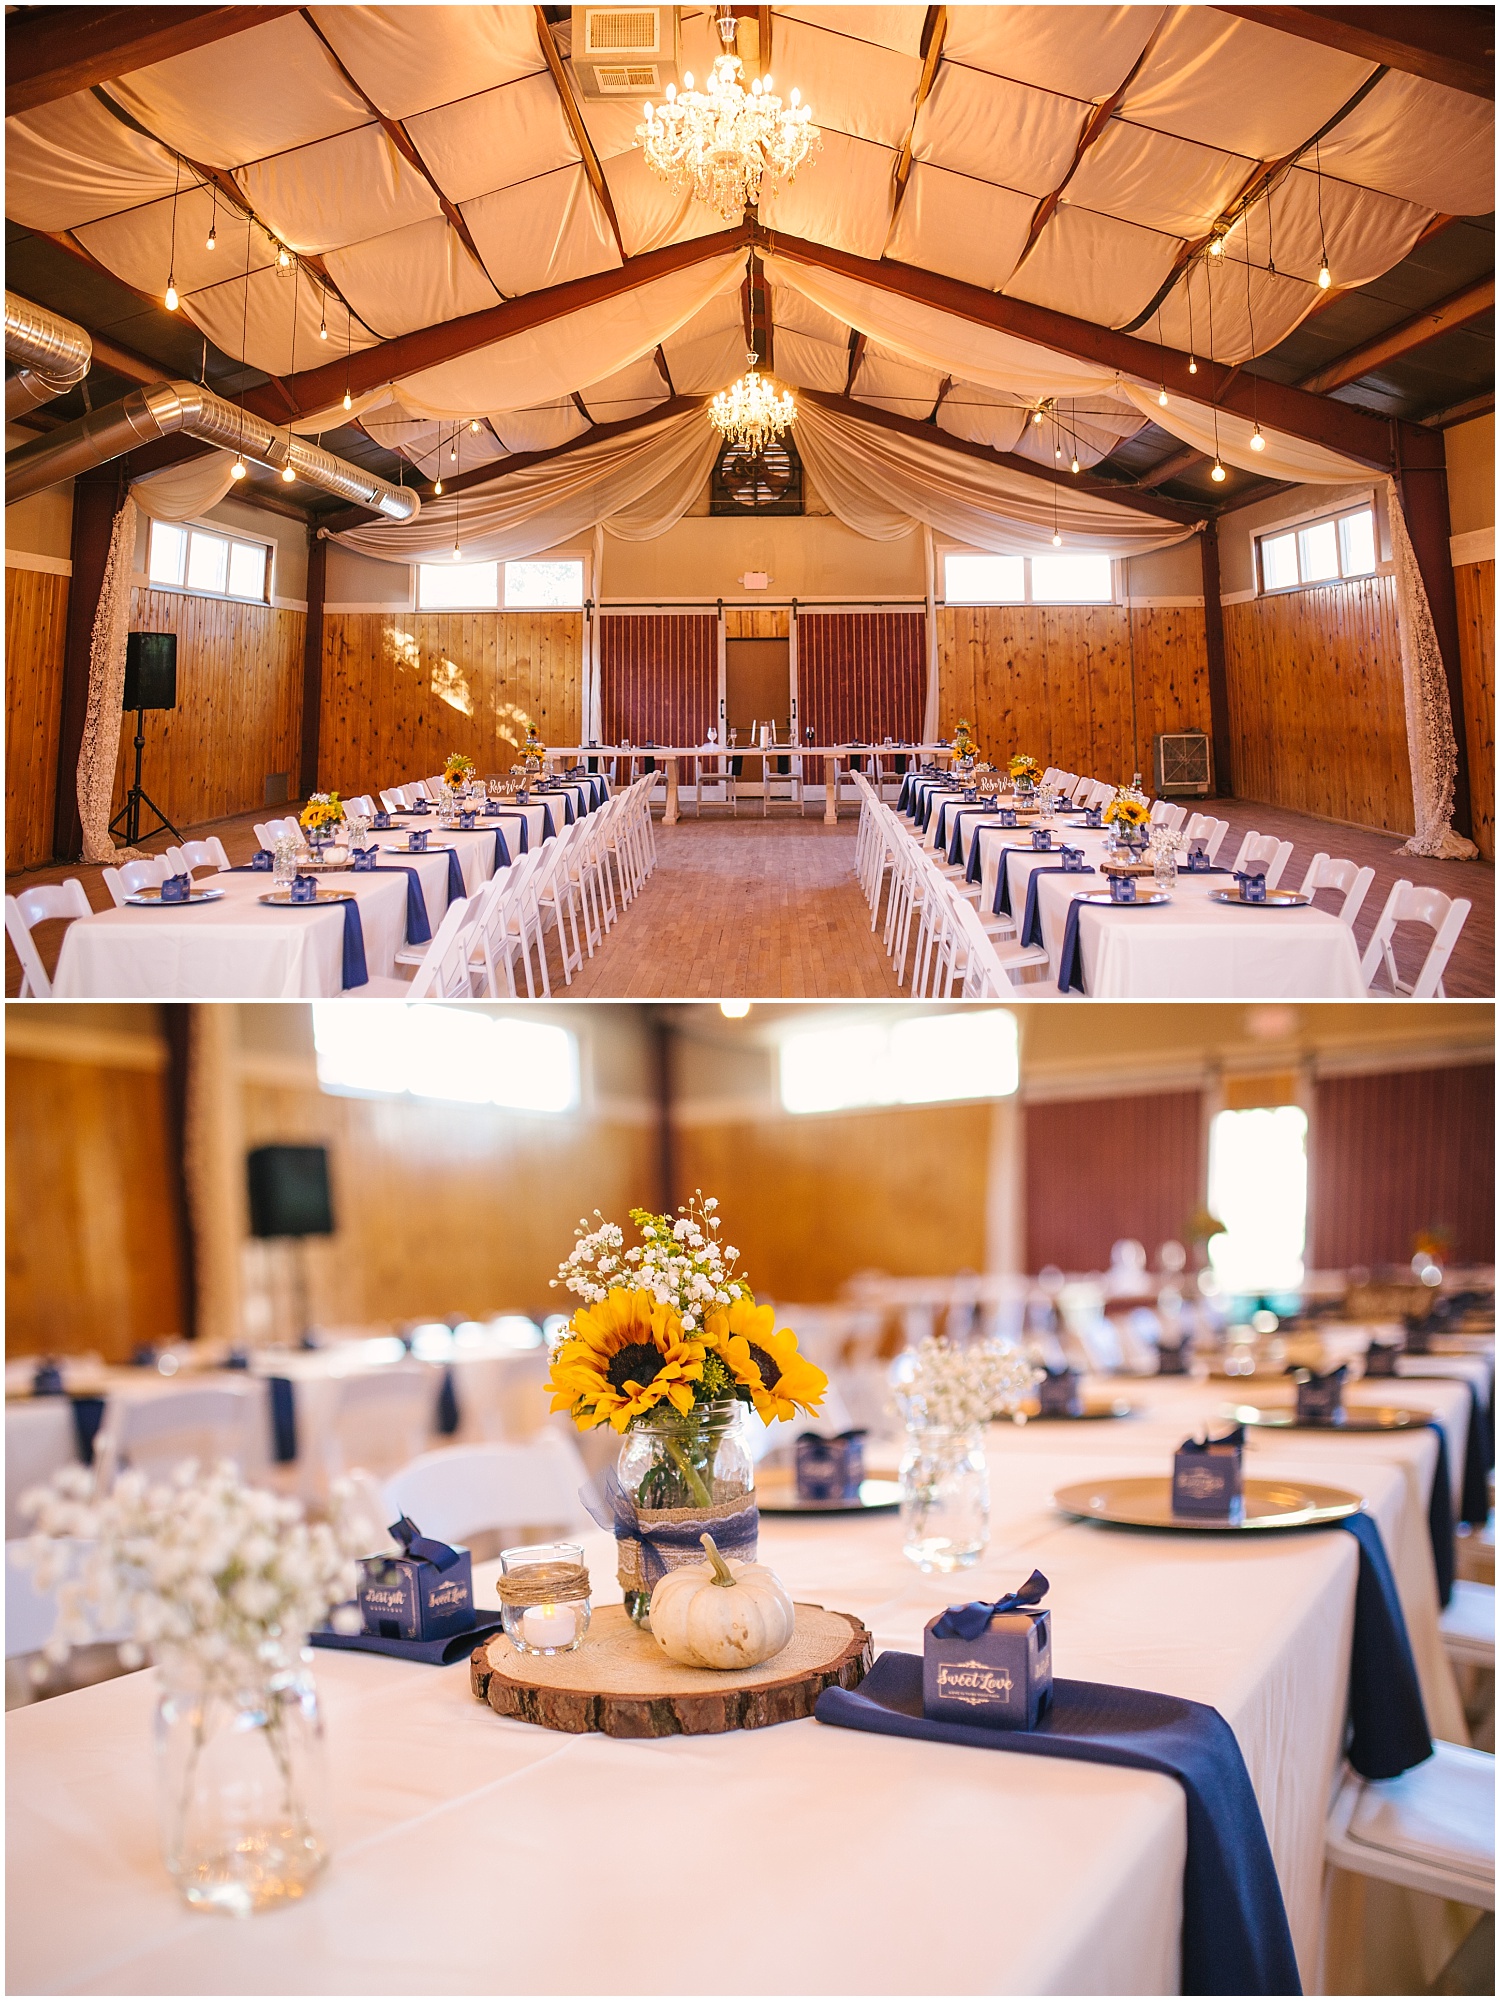 Rustic Lace Barn wedding reception with sunflowers, white mini pumpkins, and navy blue napkins